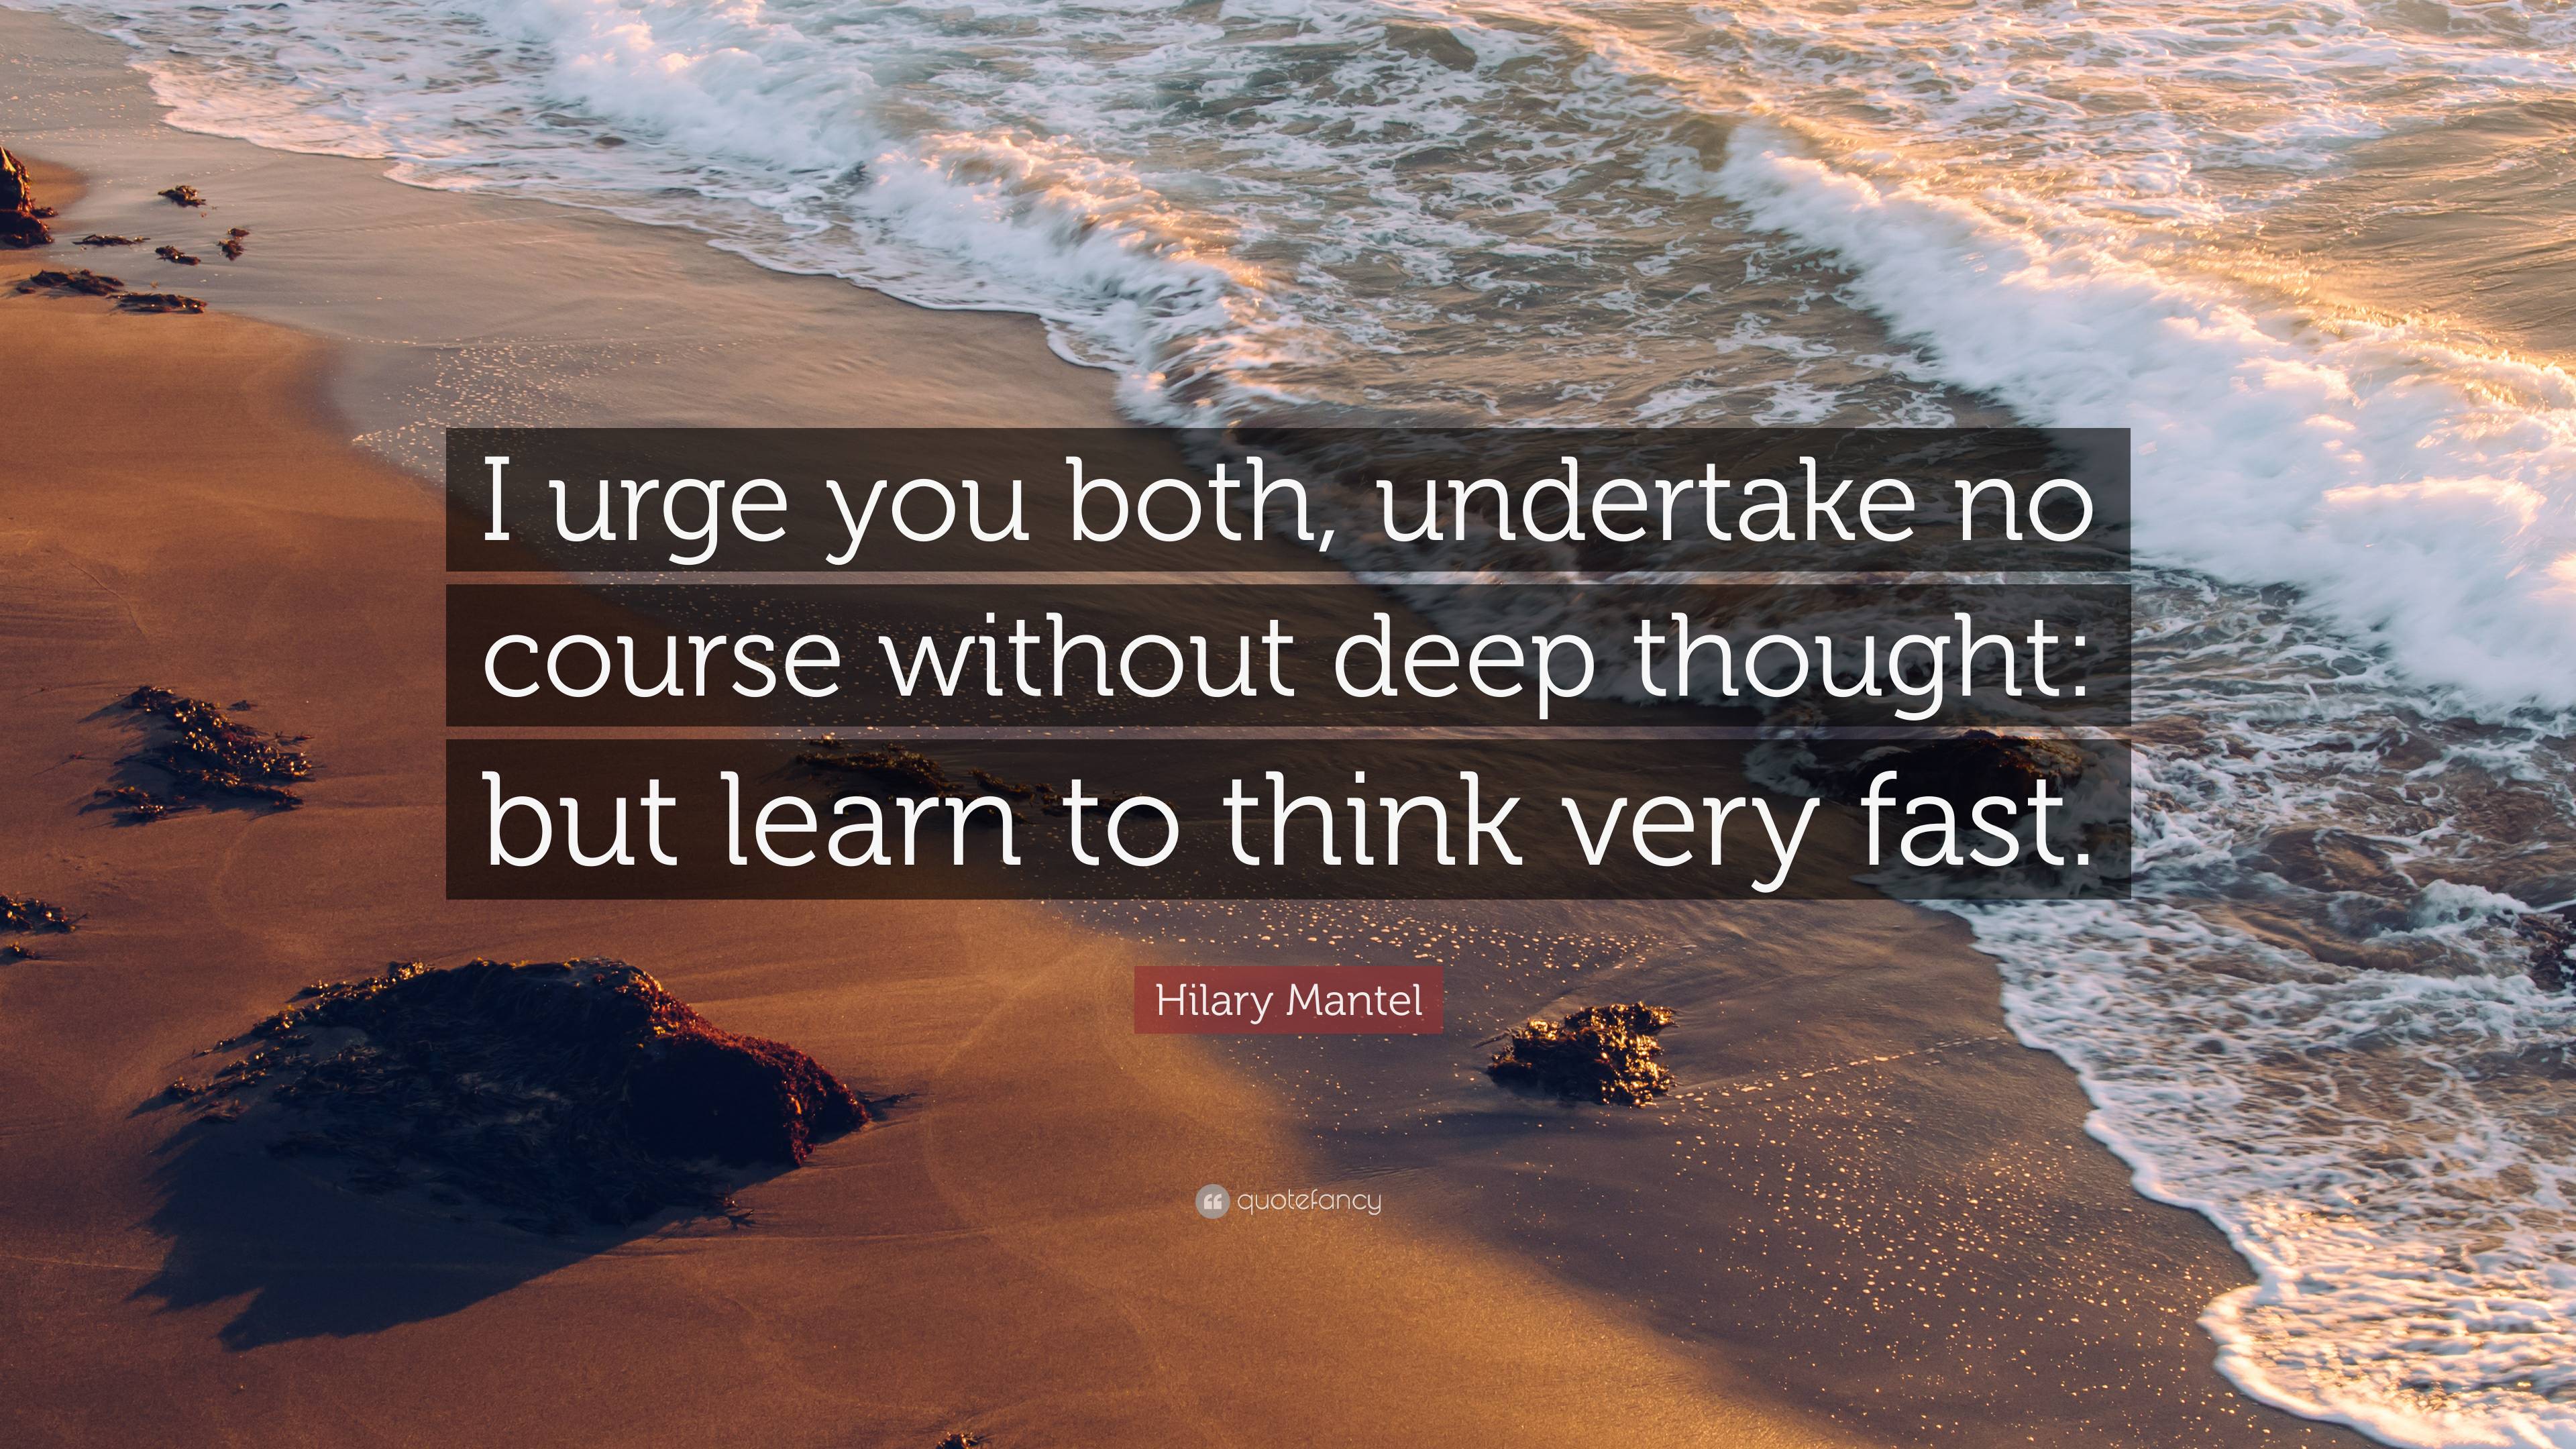 Hilary Mantel Quote: “I urge you both, undertake no course without deep thought: but learn to